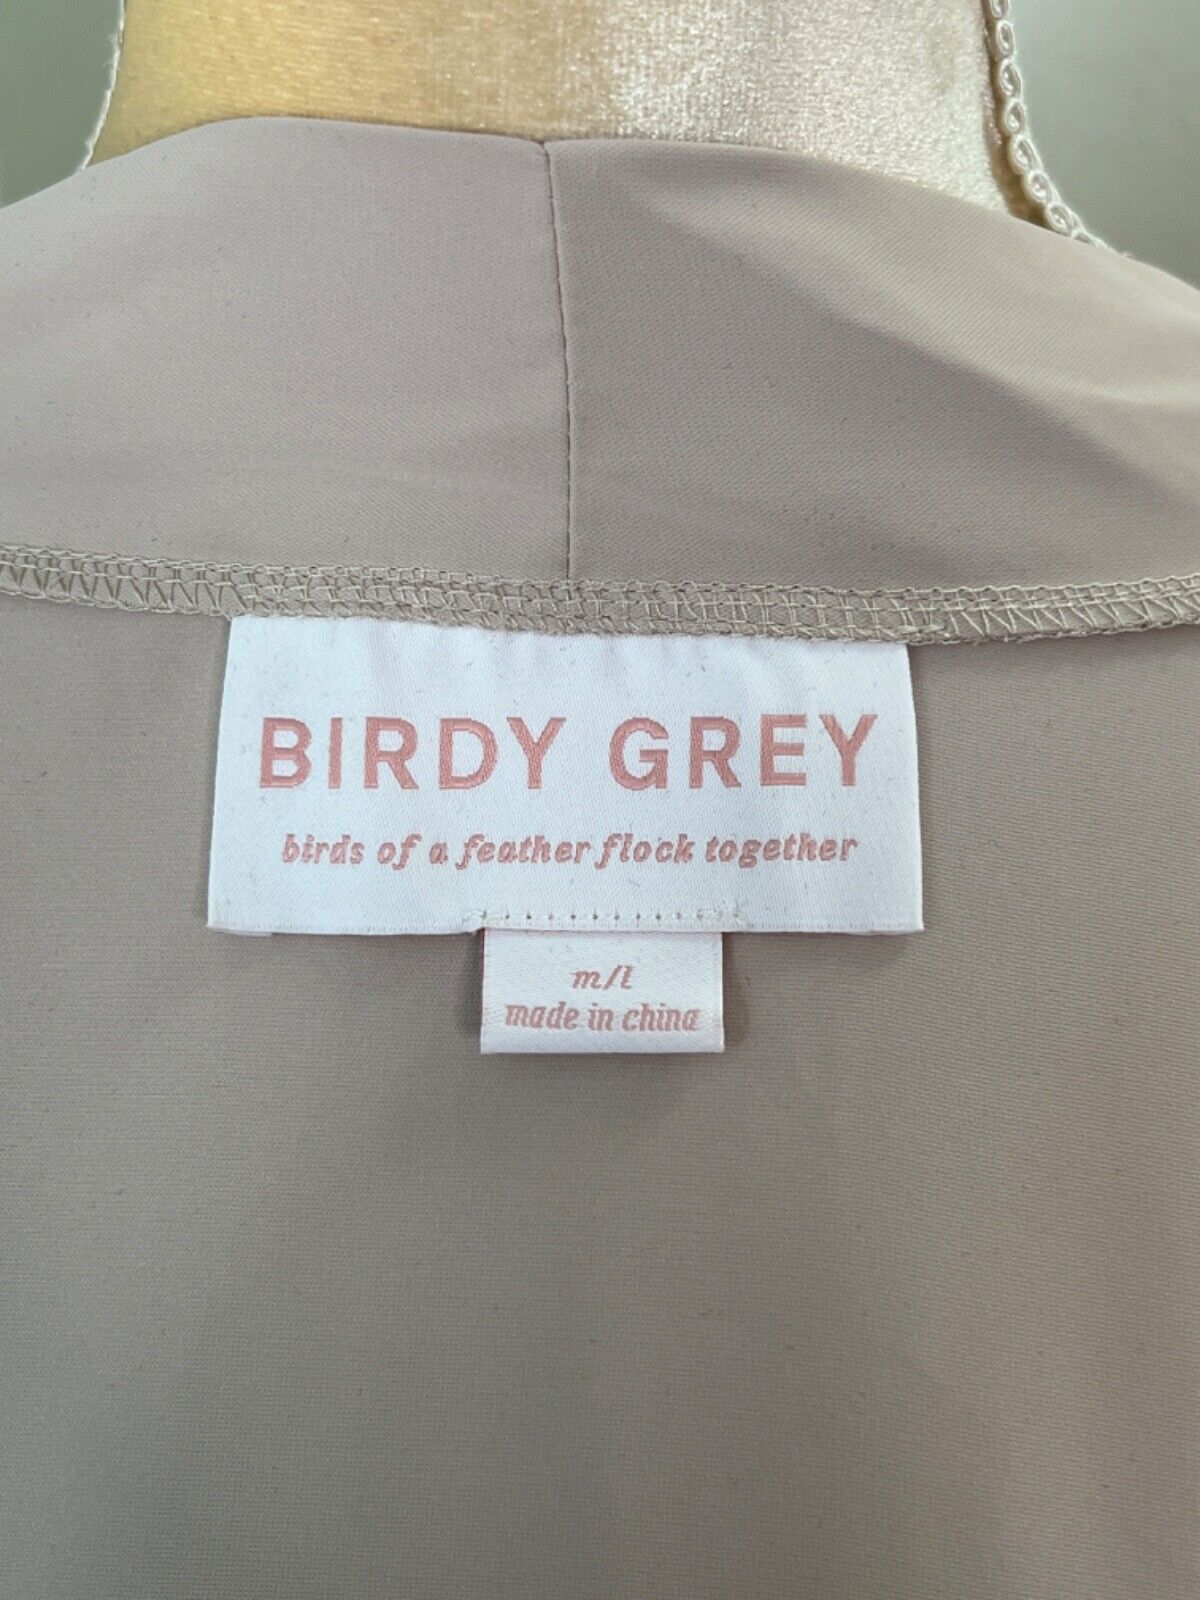 Birdy Grey Kenny Ruffle Robe Size M/L Taupe Brown - image 4